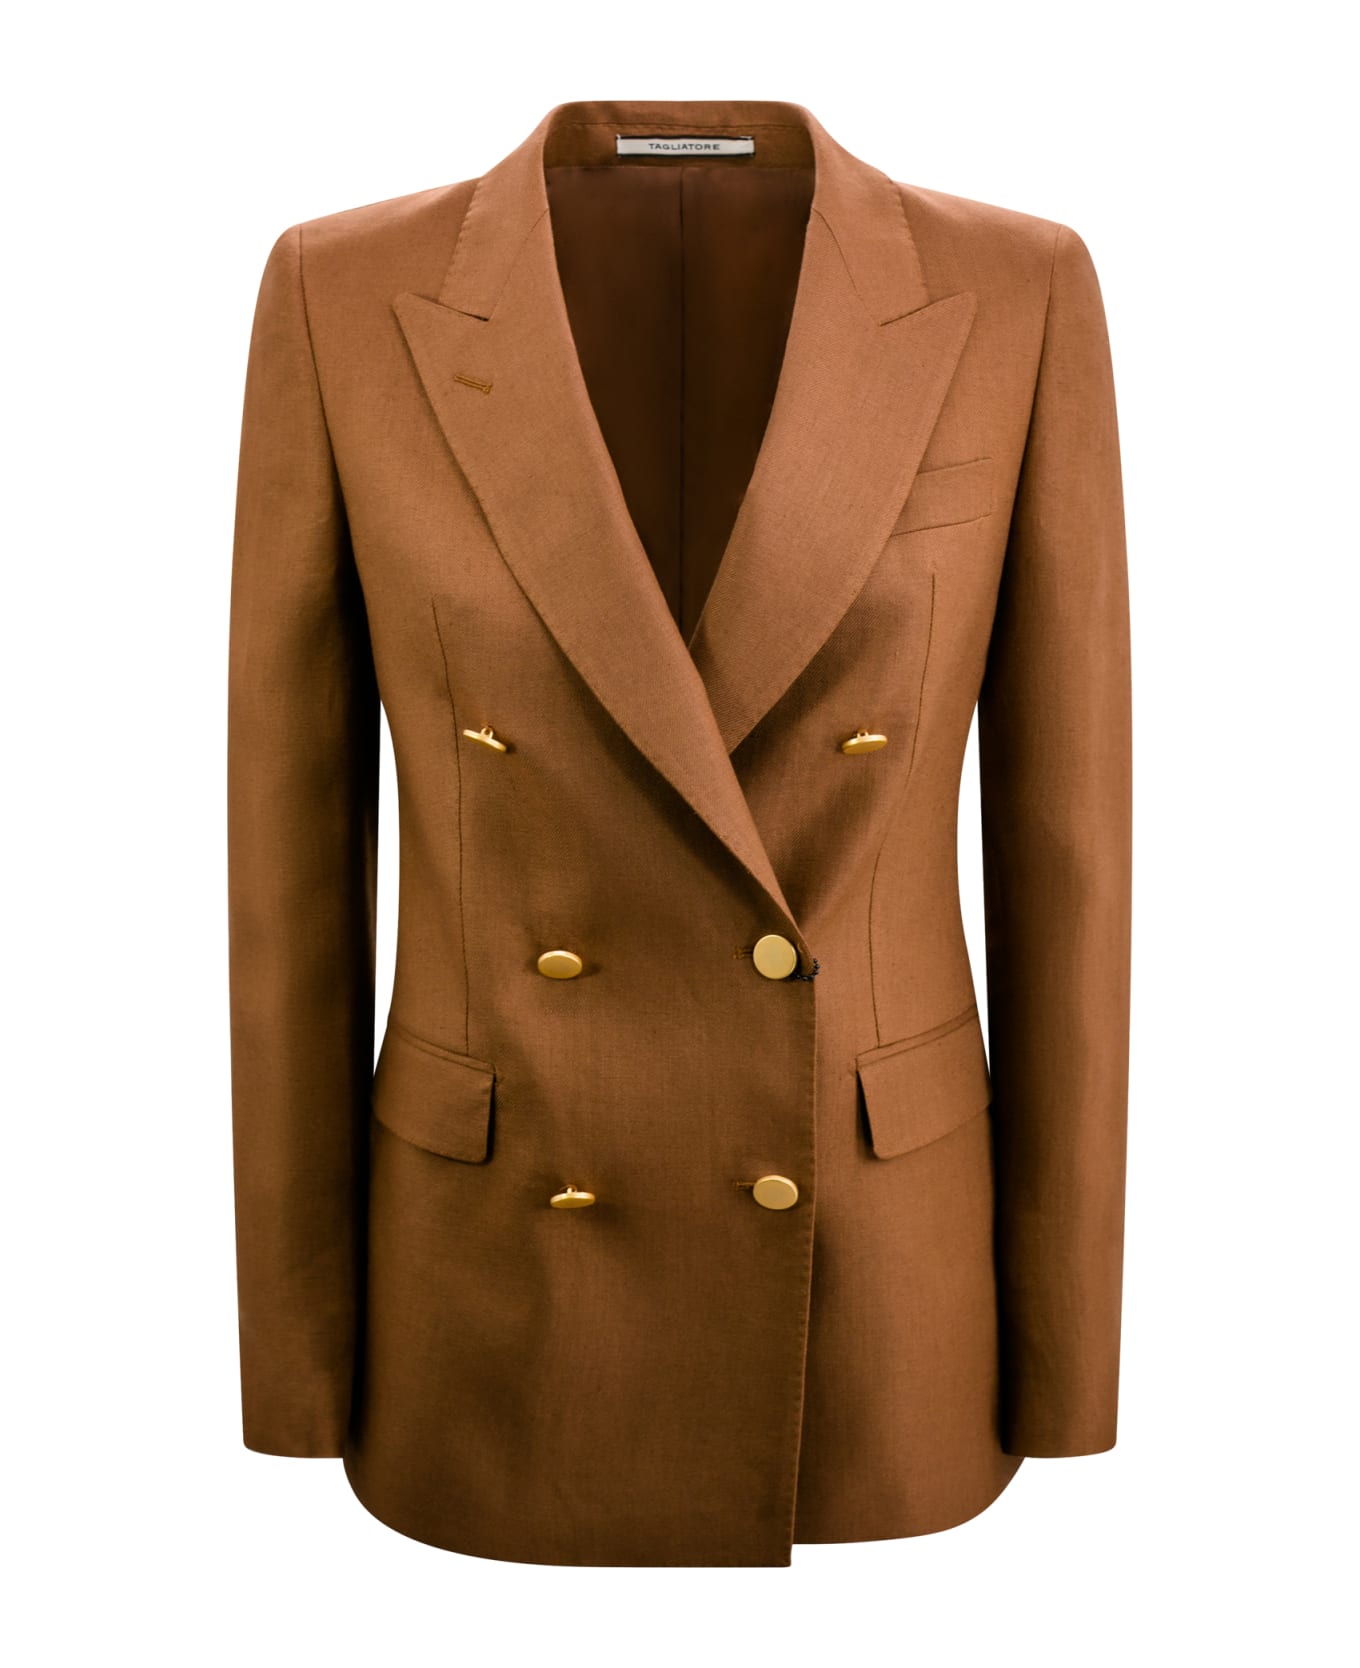 Tagliatore Full Suit With Double-breasted Blazer With Peaked Lapels And Straight Pants. - Brown